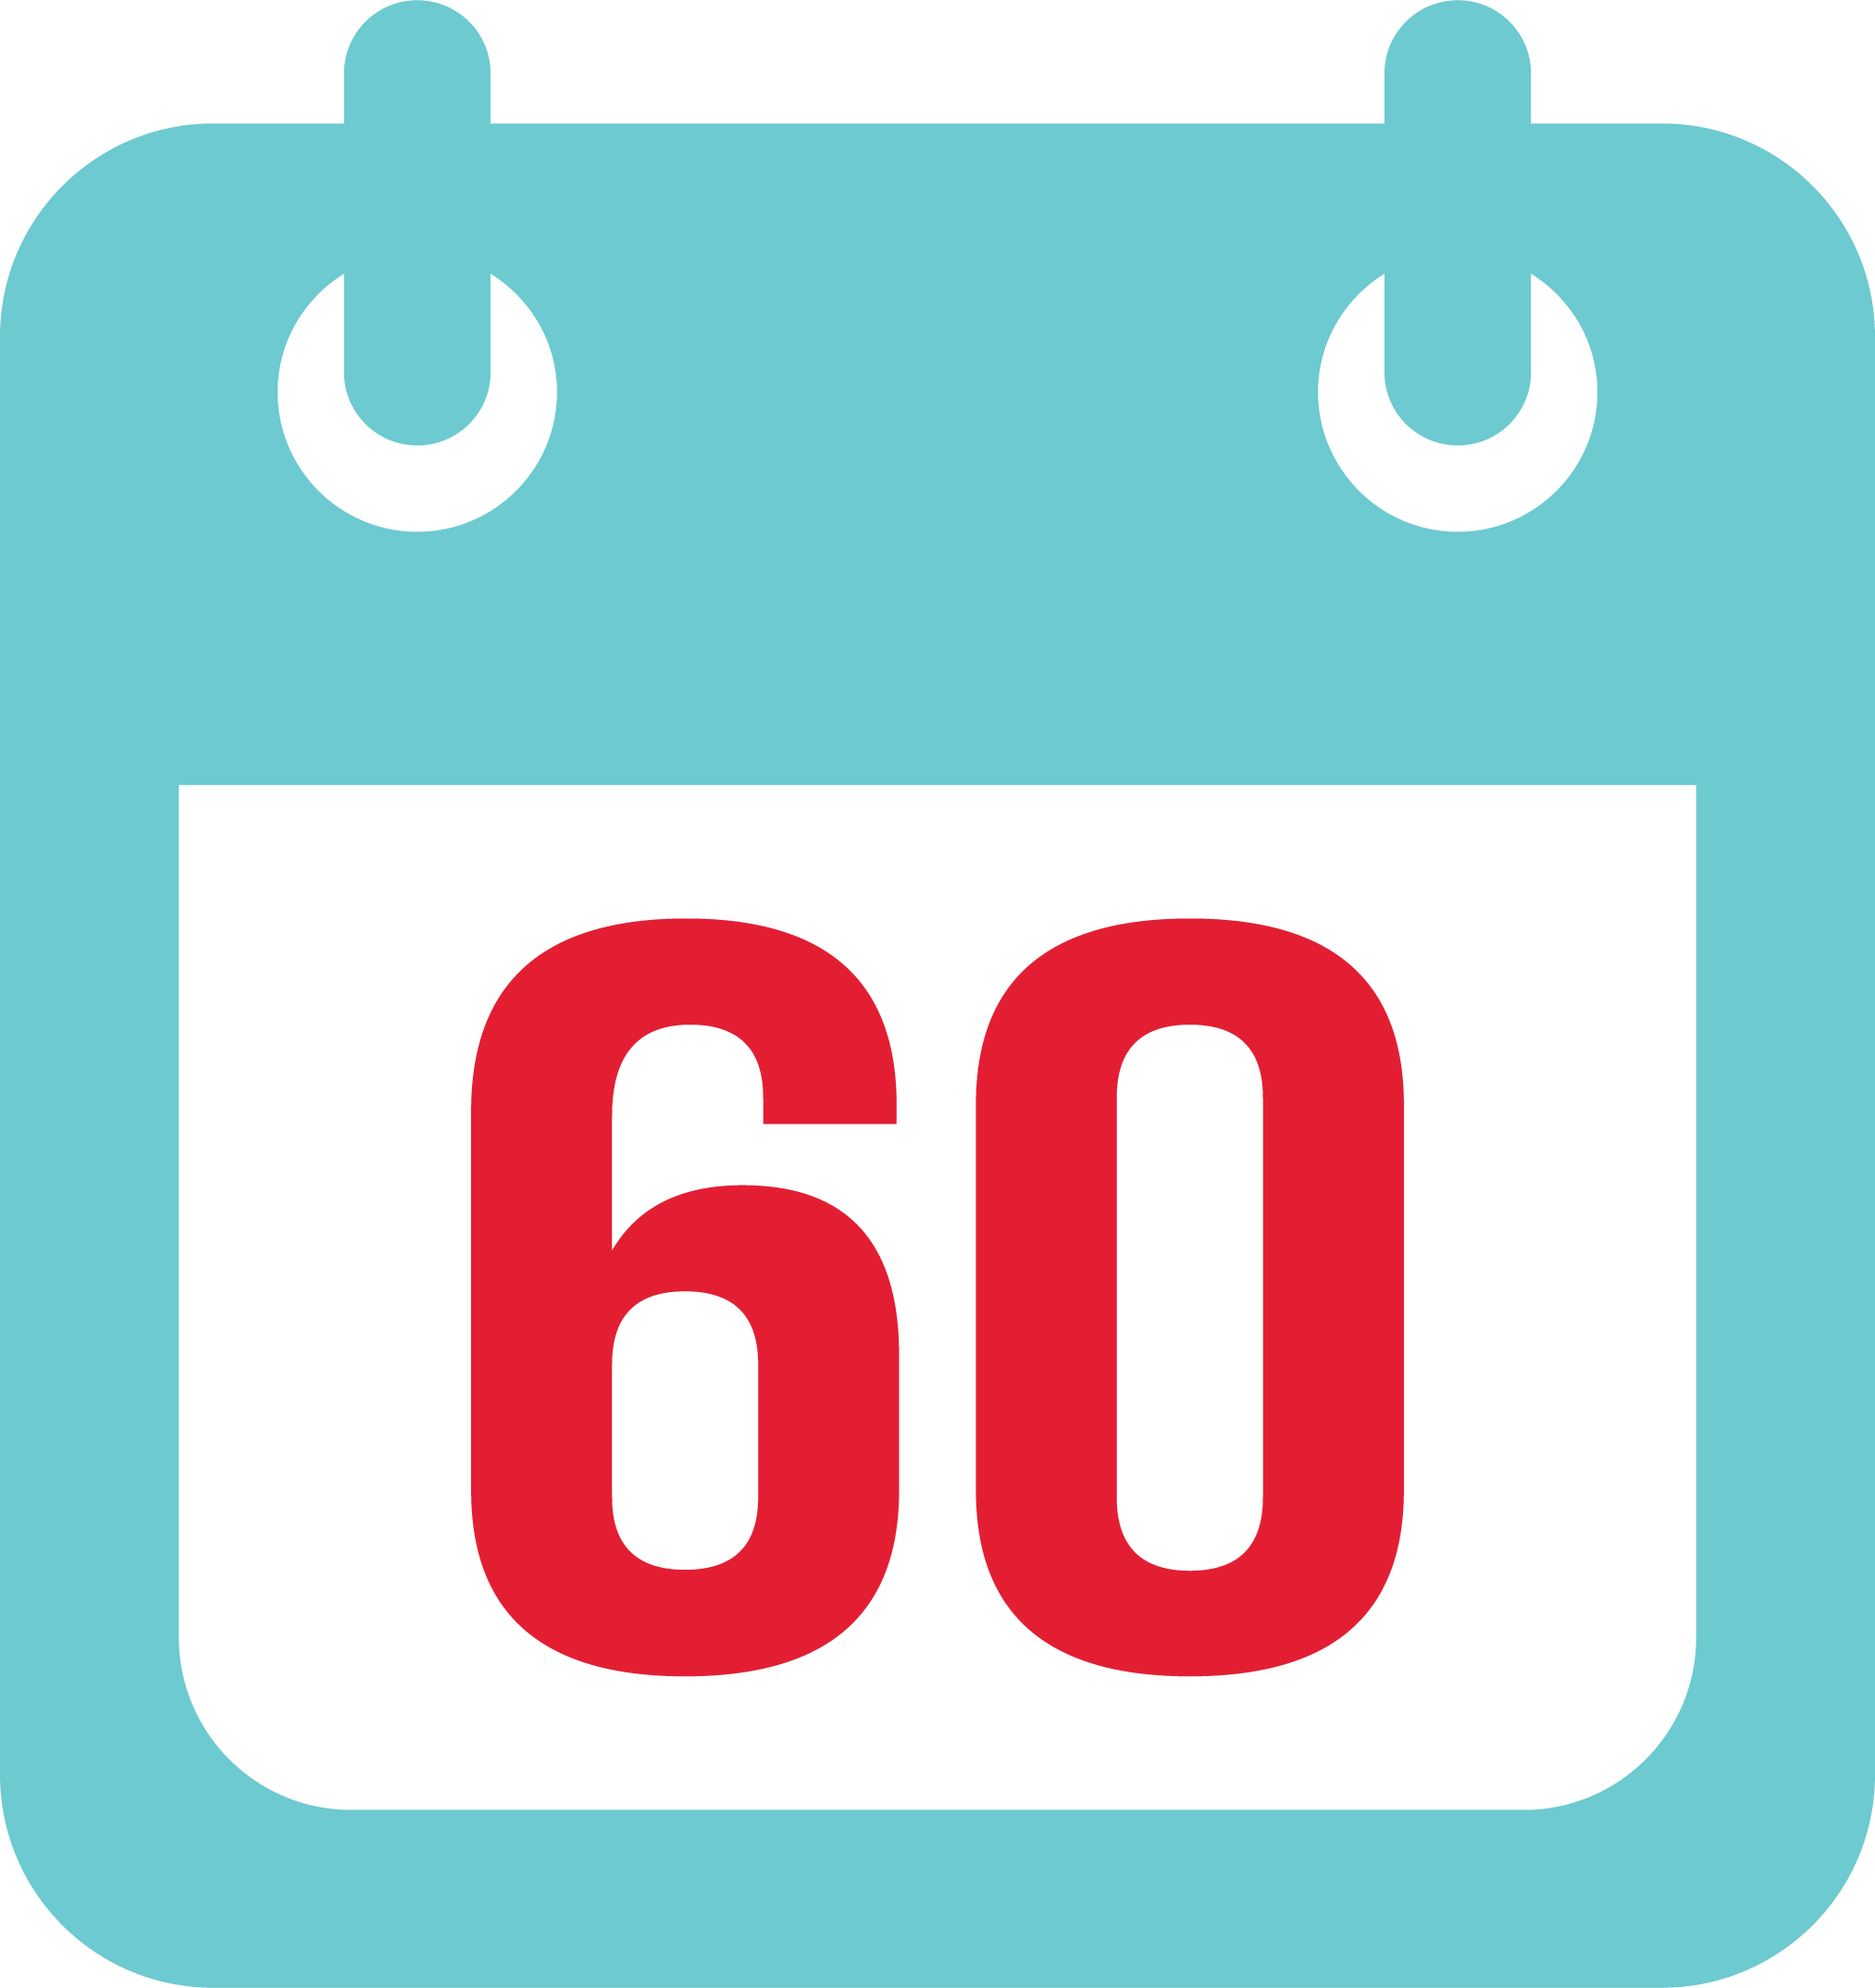 60 day no payment icon